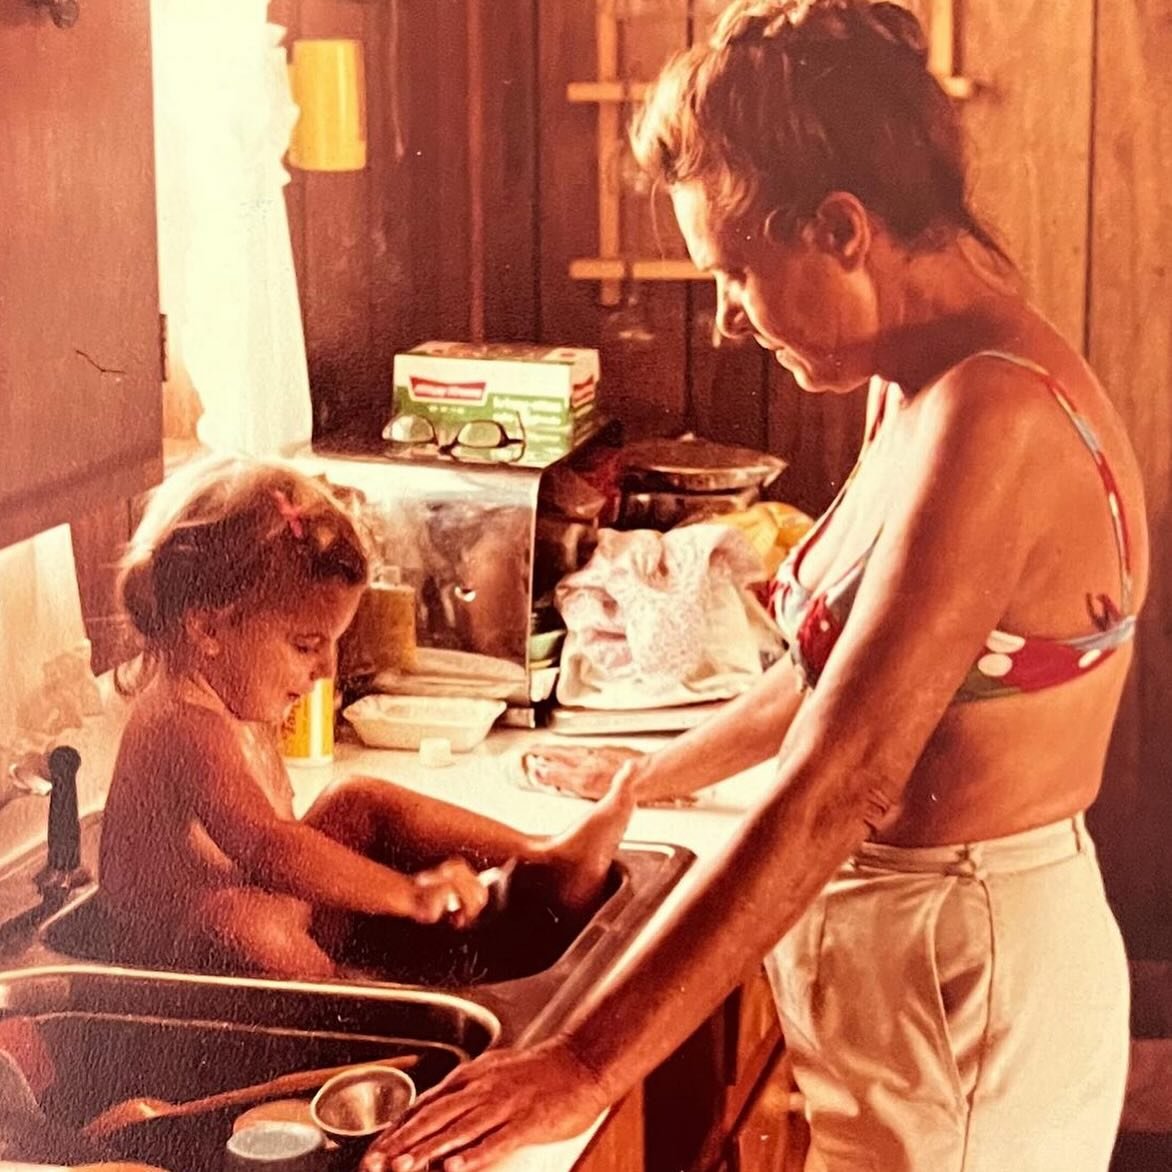 I will never stop using this picture of my grandmother giving me a bath me in the sink, Nags Head, NC 1981ish. She was the epitome of strength, kindness and &ldquo;bless your heart&rdquo;. I adored her. 
✨My babes, the year we moved here, 2013
✨My ha